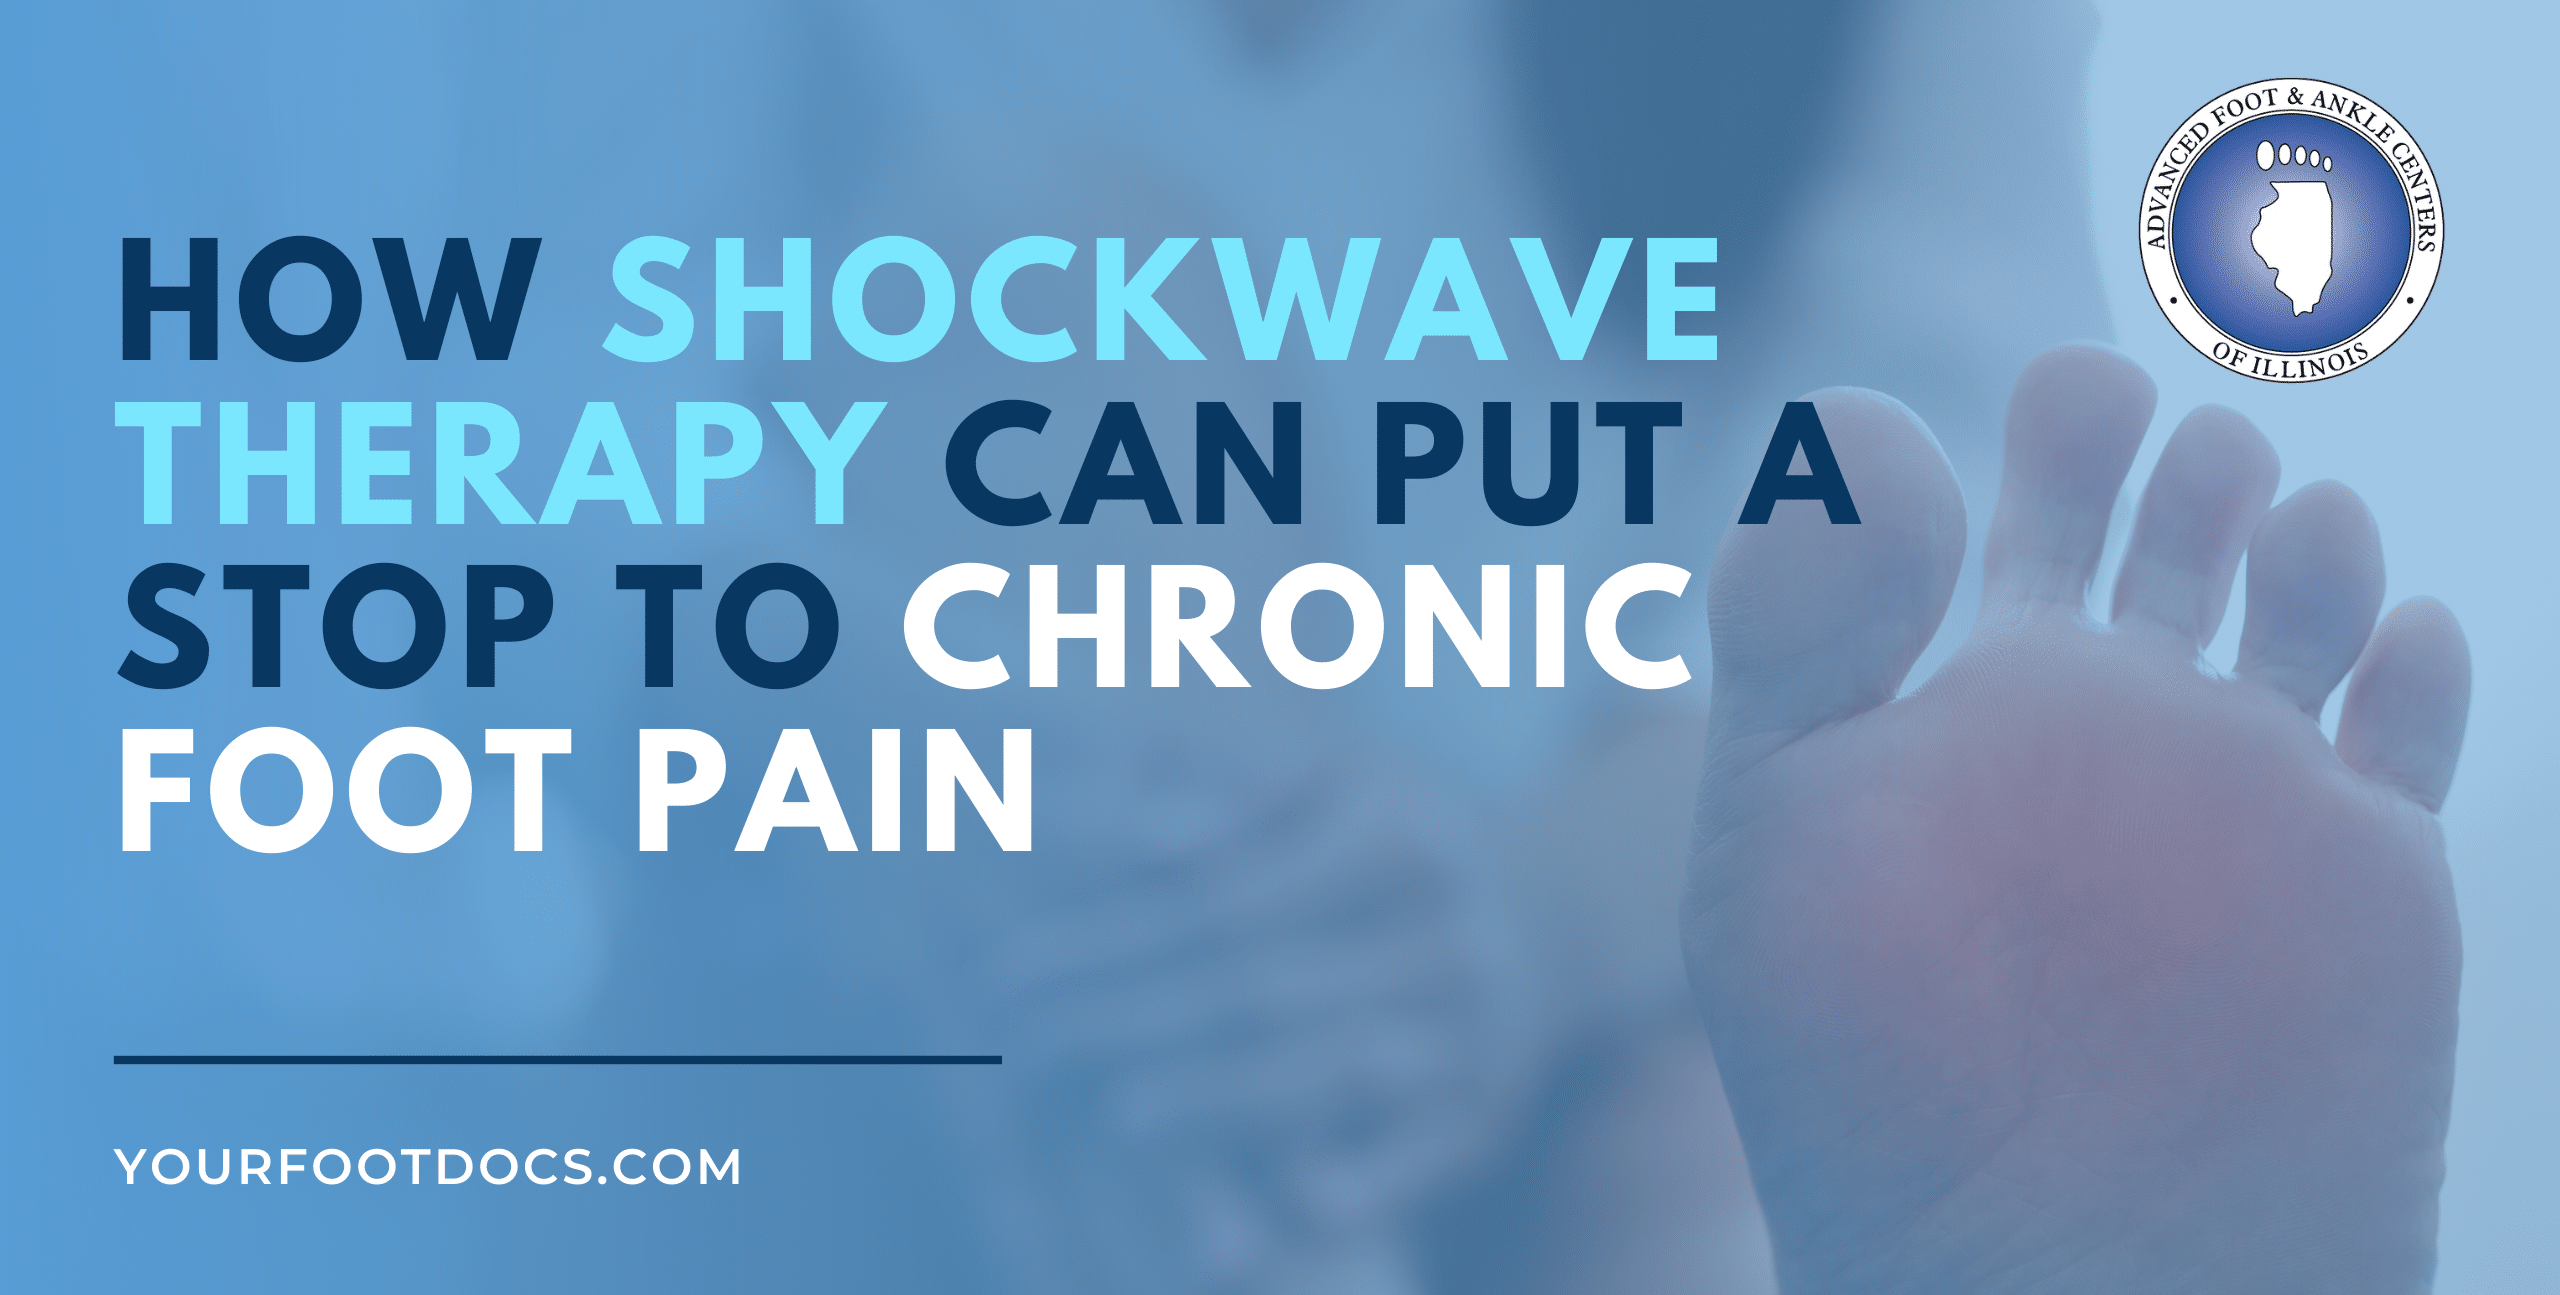 How shockwave therapy can put a stop to chronic foot pain graphic